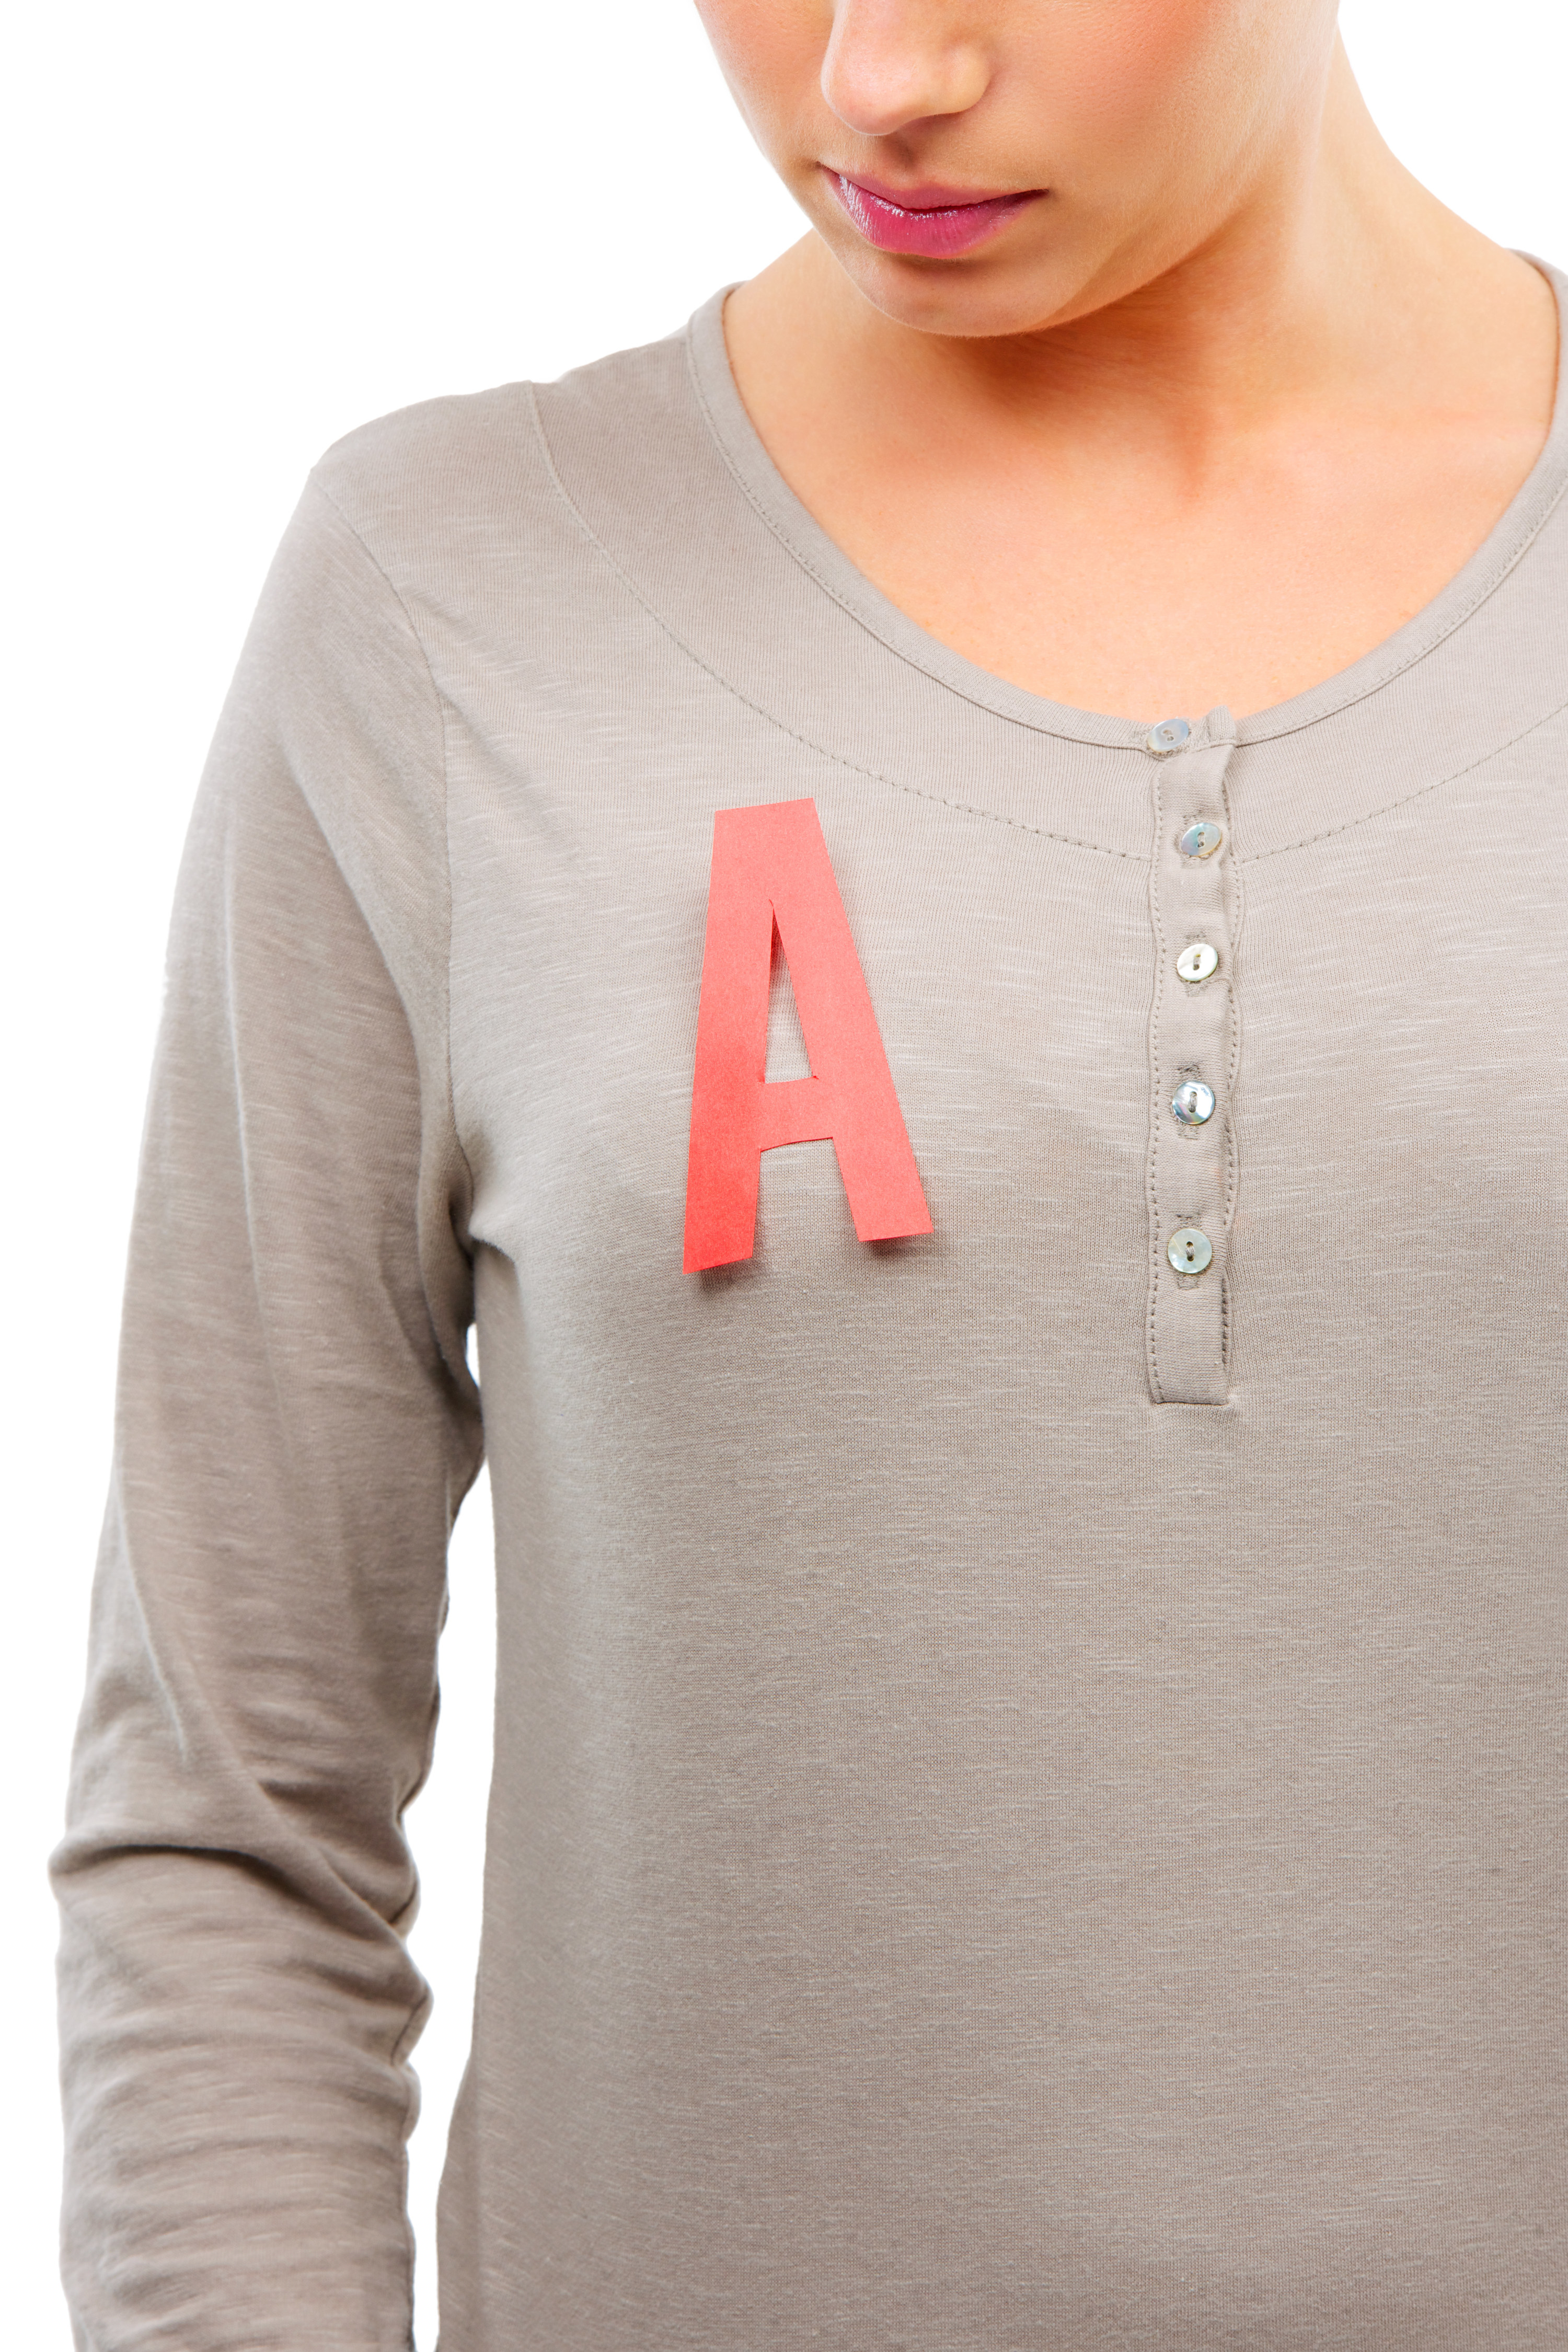 A woman with a red letter A on her shirt